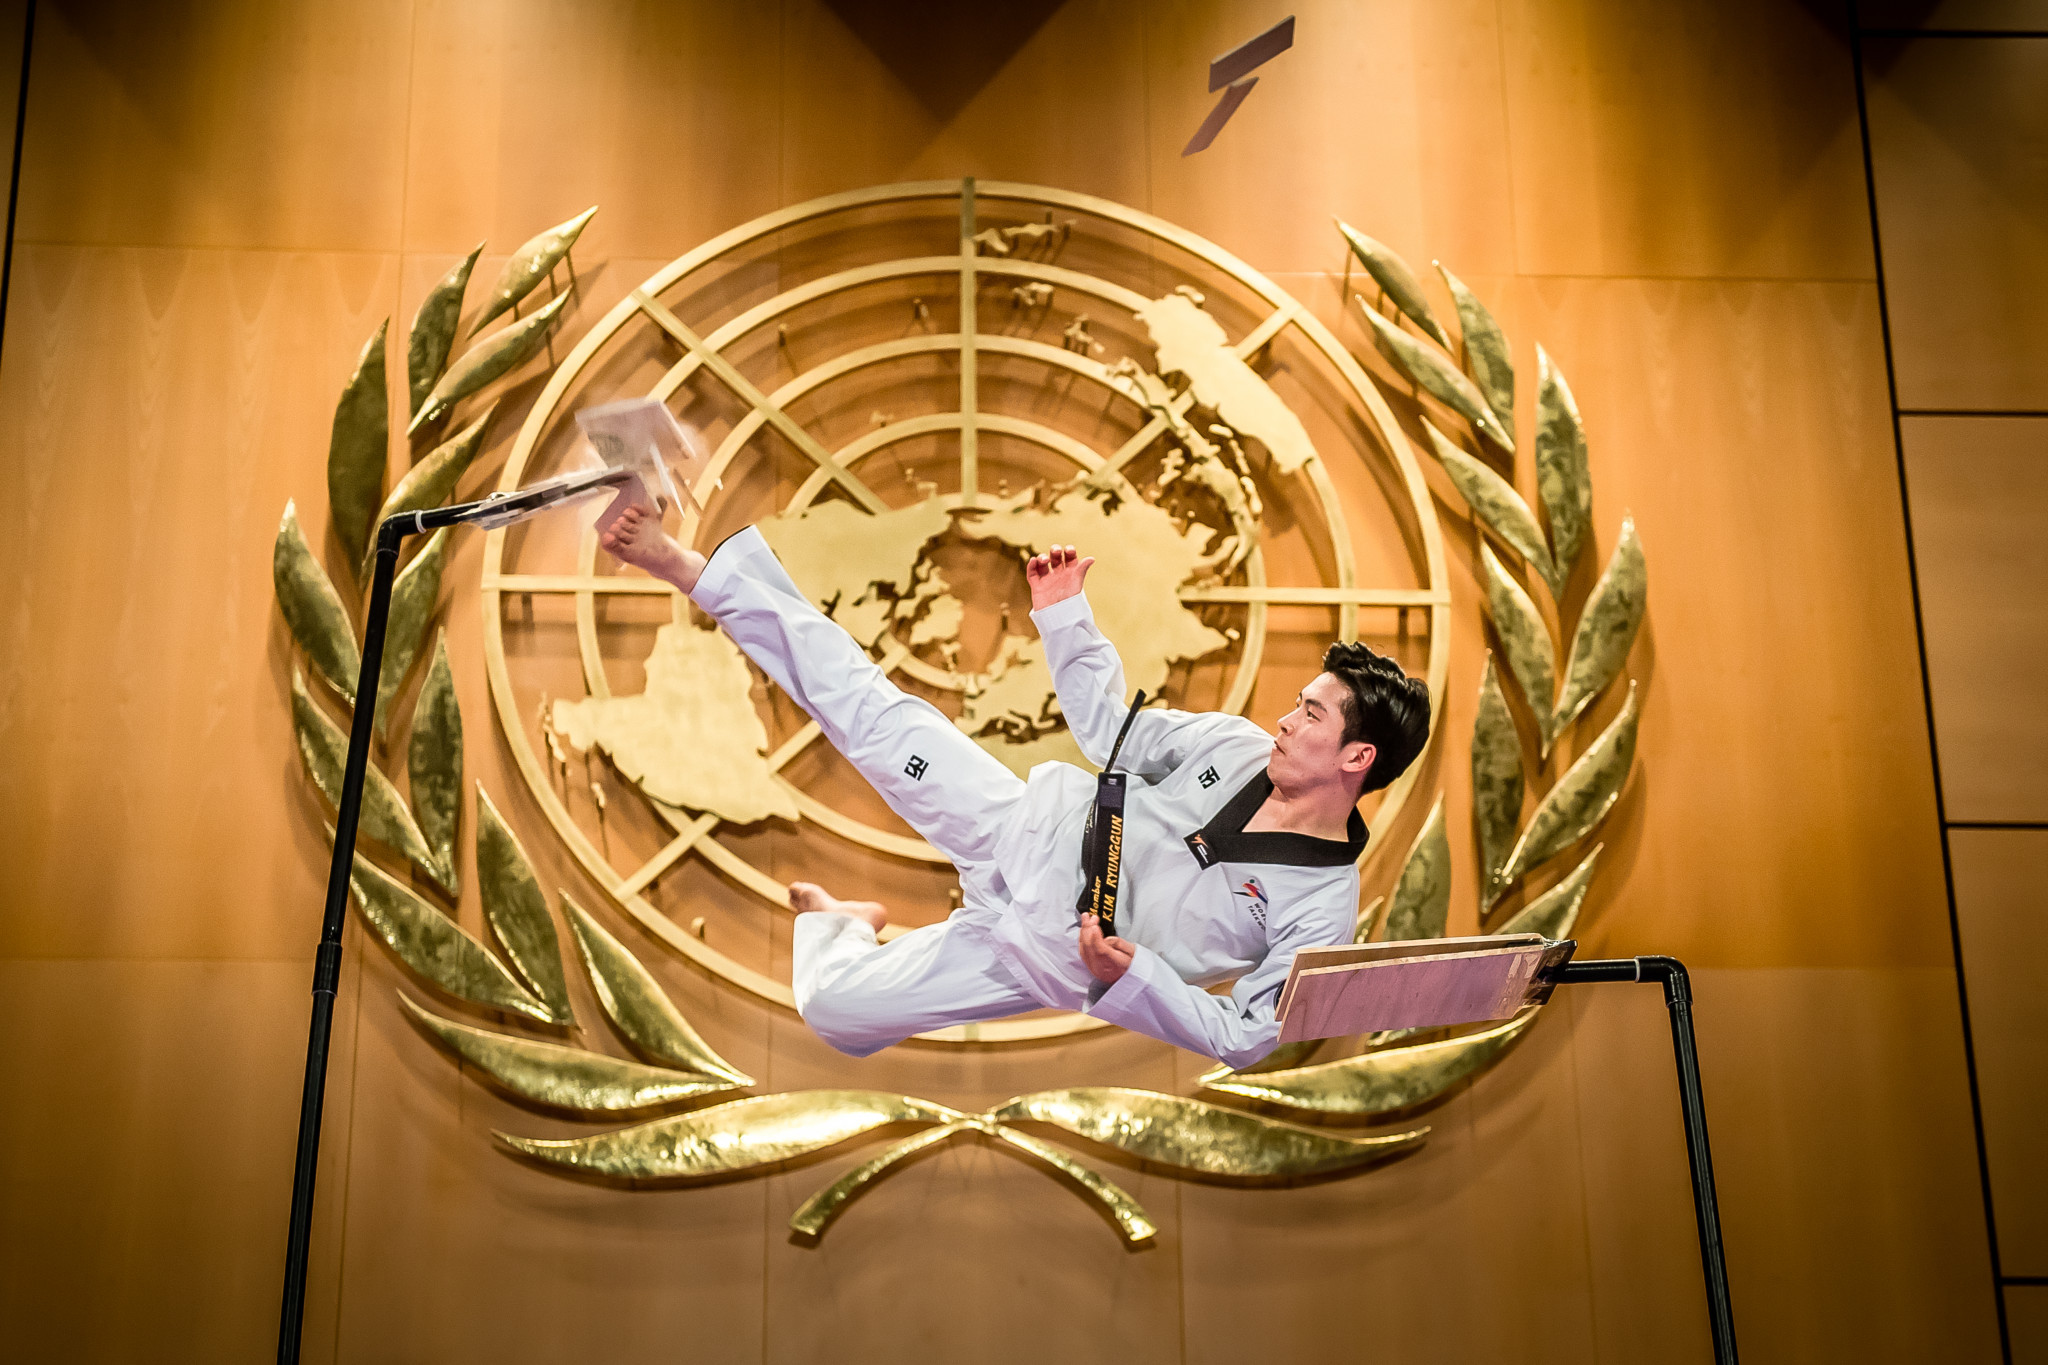 WT and ITF concluded a week of joint demonstrations at the UN Geneva office ©World Taekwondo